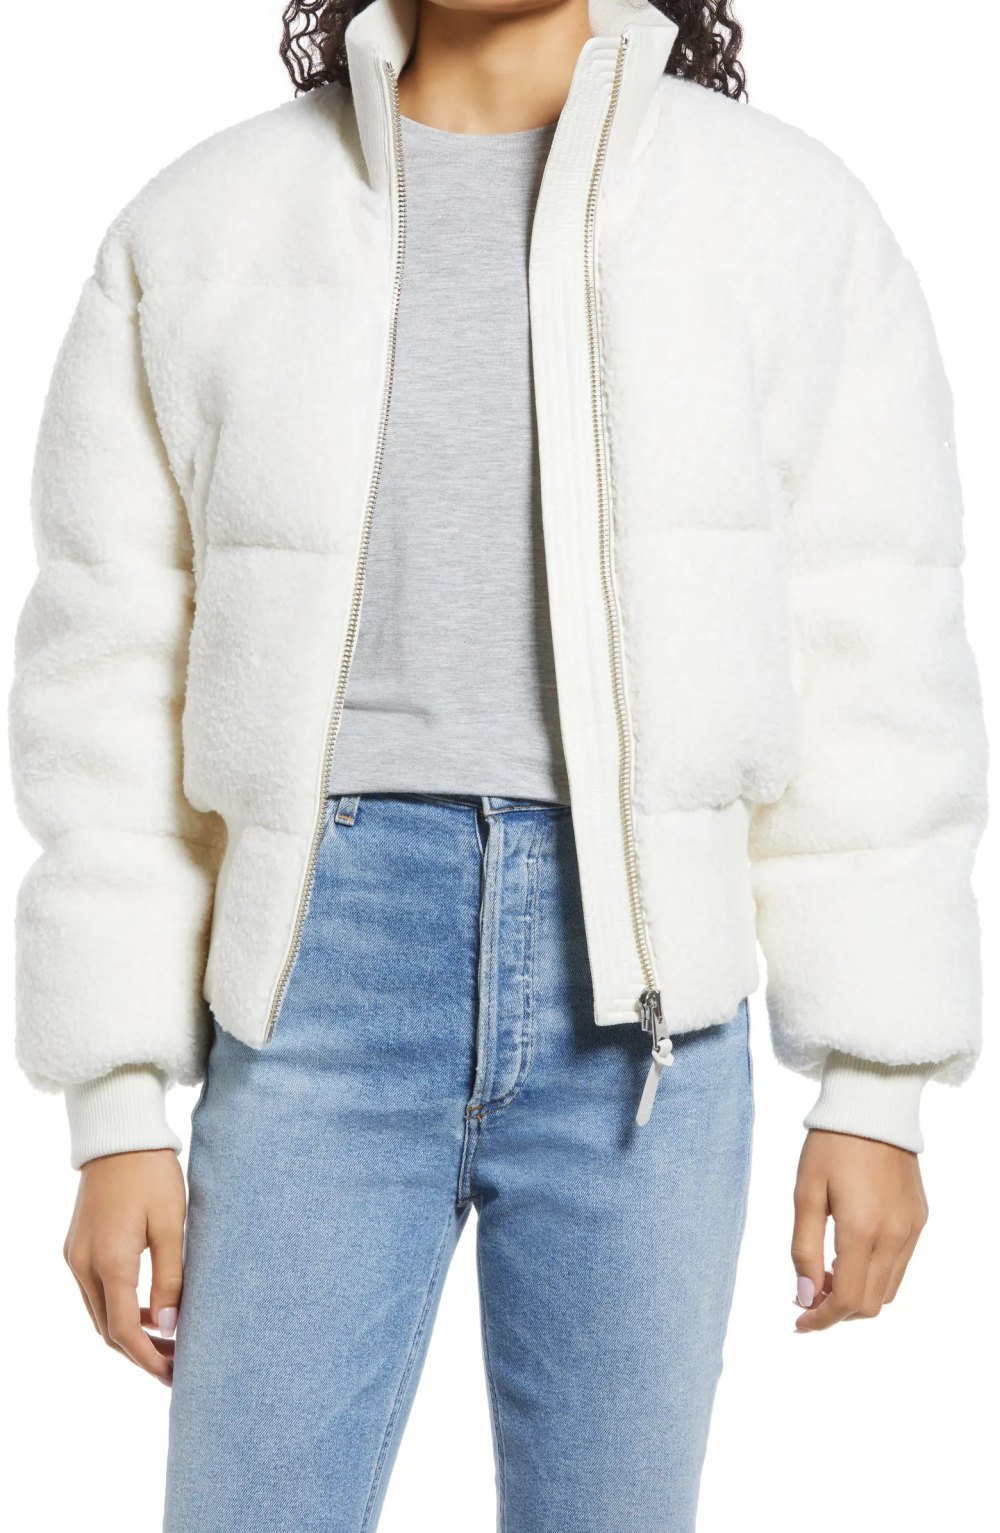 Shop 11 Cozy Coats From Nordstrom's Early Black Friday Sale